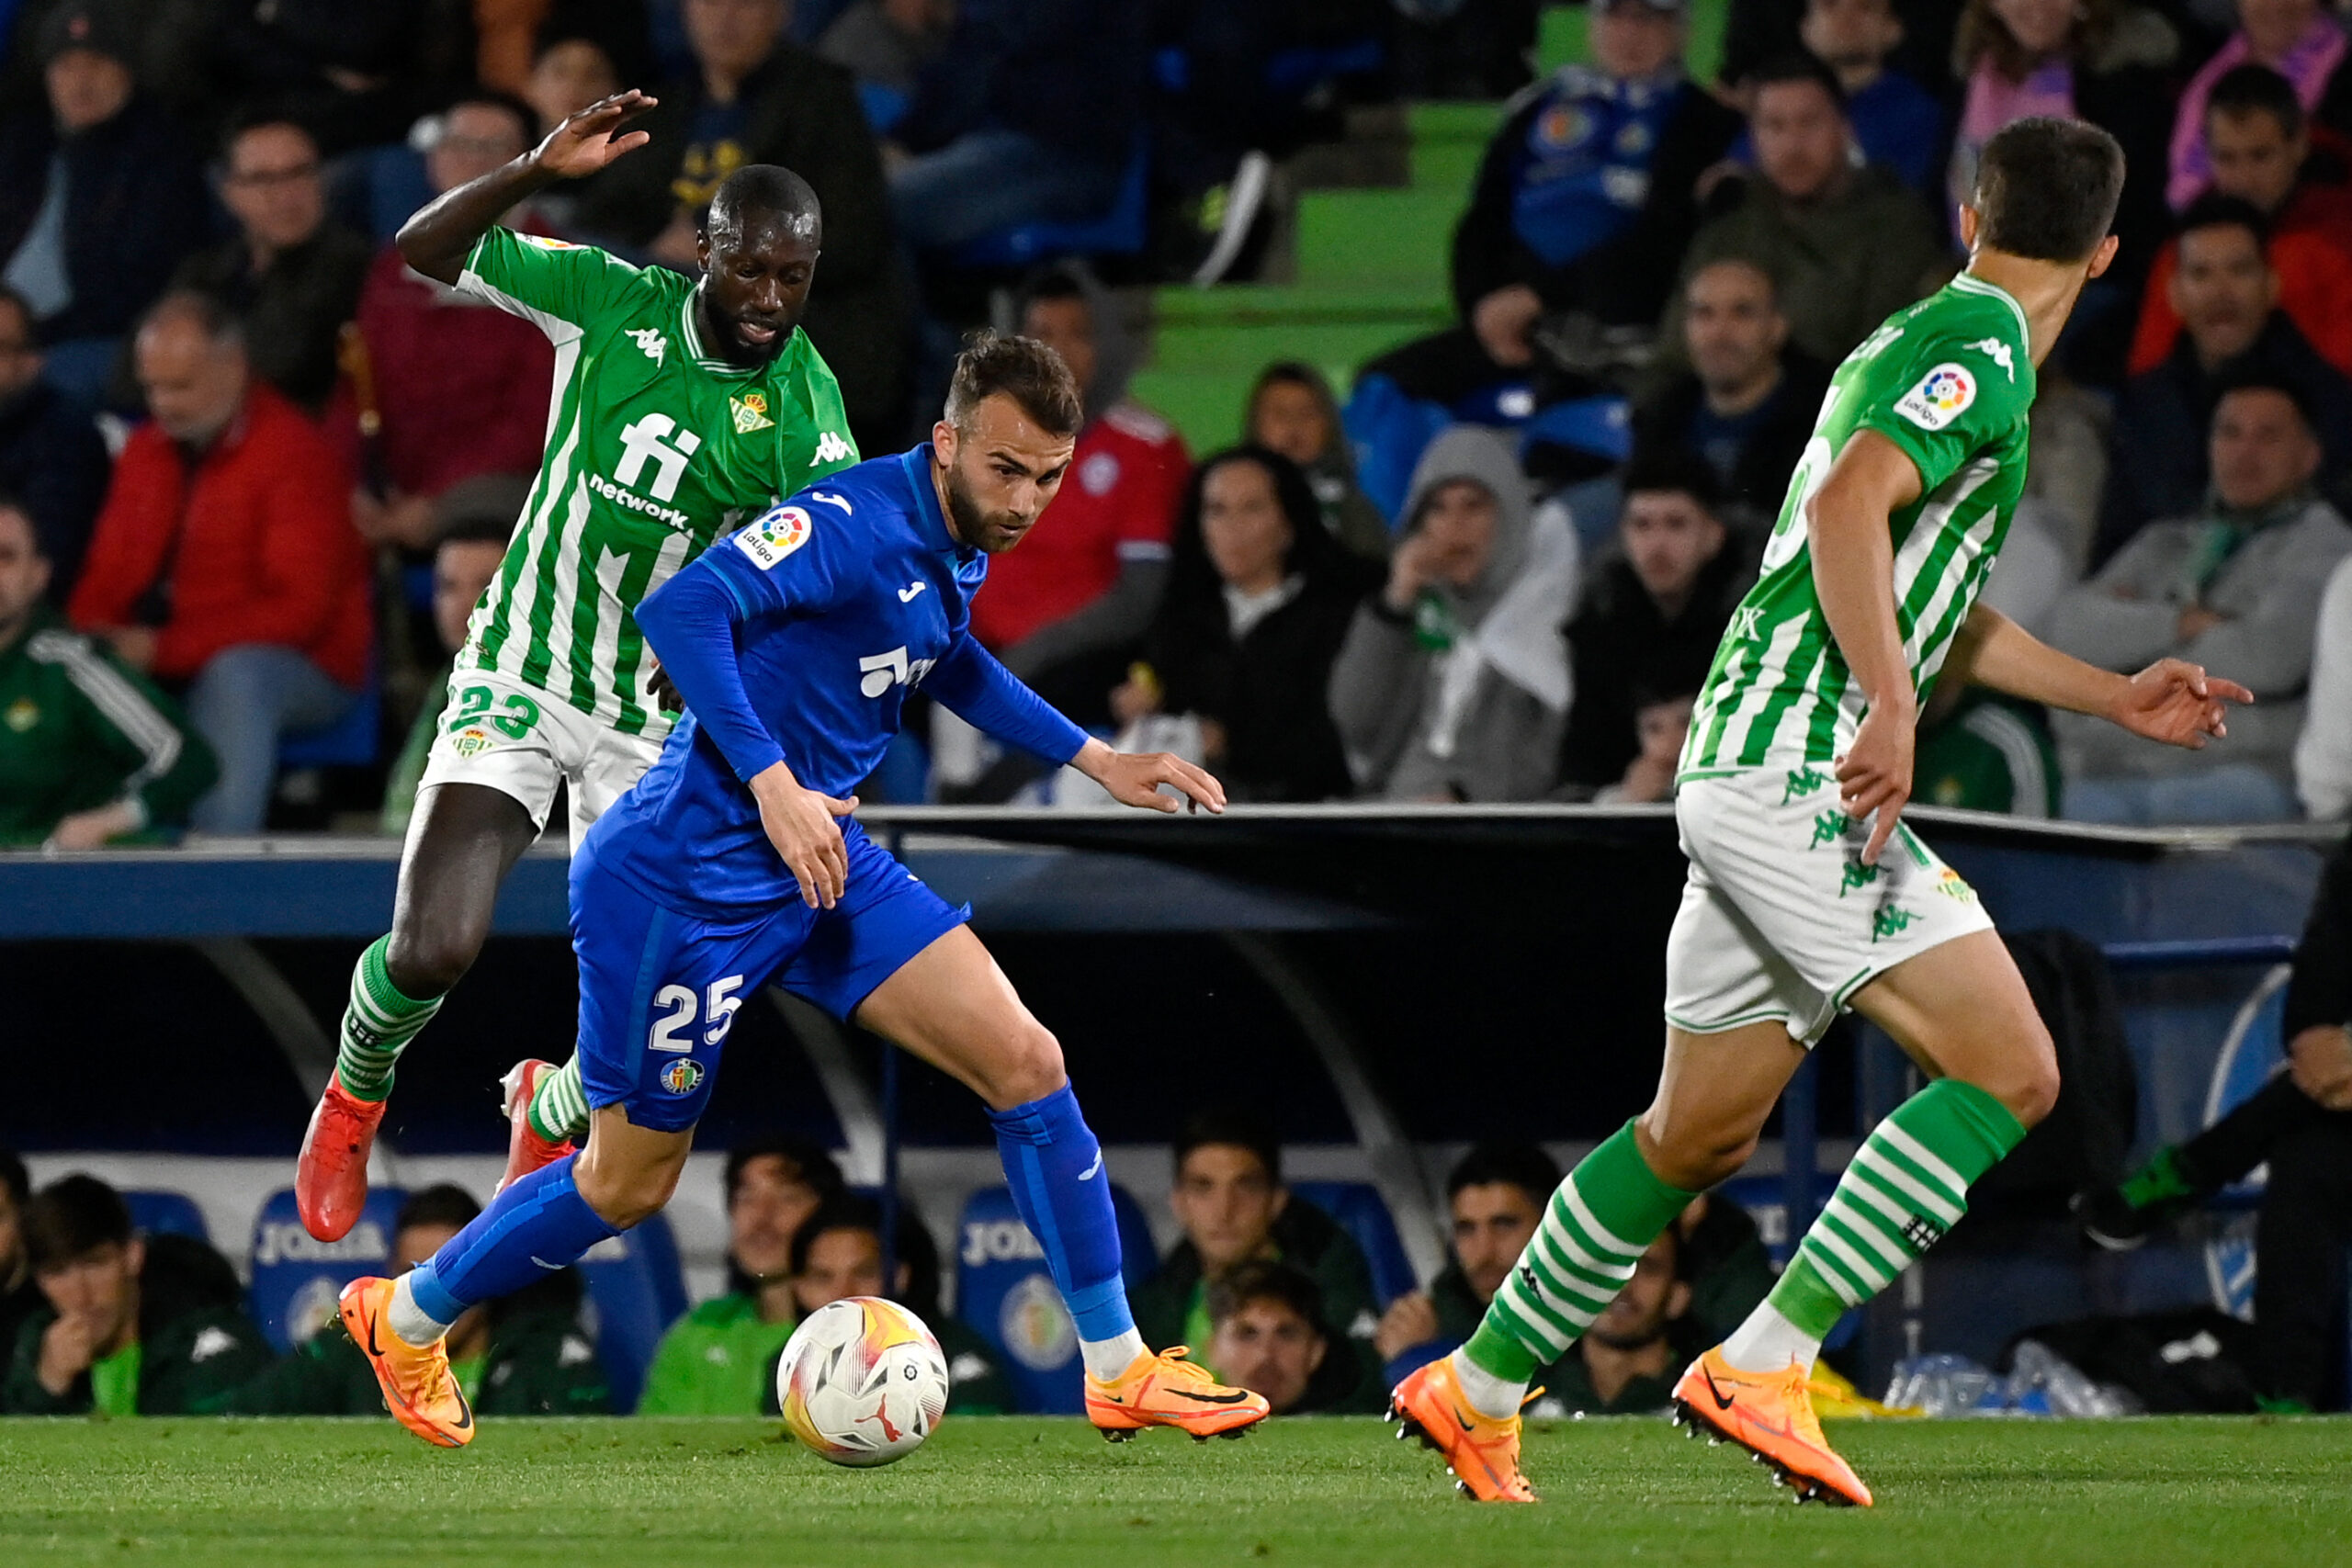 Real Betis' French-Senegalese defender Youssouf Sabaly (L) vies with Getafe's Spanish forward Borja Mayoral during the Spanish League football match between Getafe CF and Real Betis at the Col. Alfonso Perez stadium in Getafe on May 2, 2022. (Photo by PIERRE-PHILIPPE MARCOU / AFP) (Photo by PIERRE-PHILIPPE MARCOU/AFP via Getty Images)